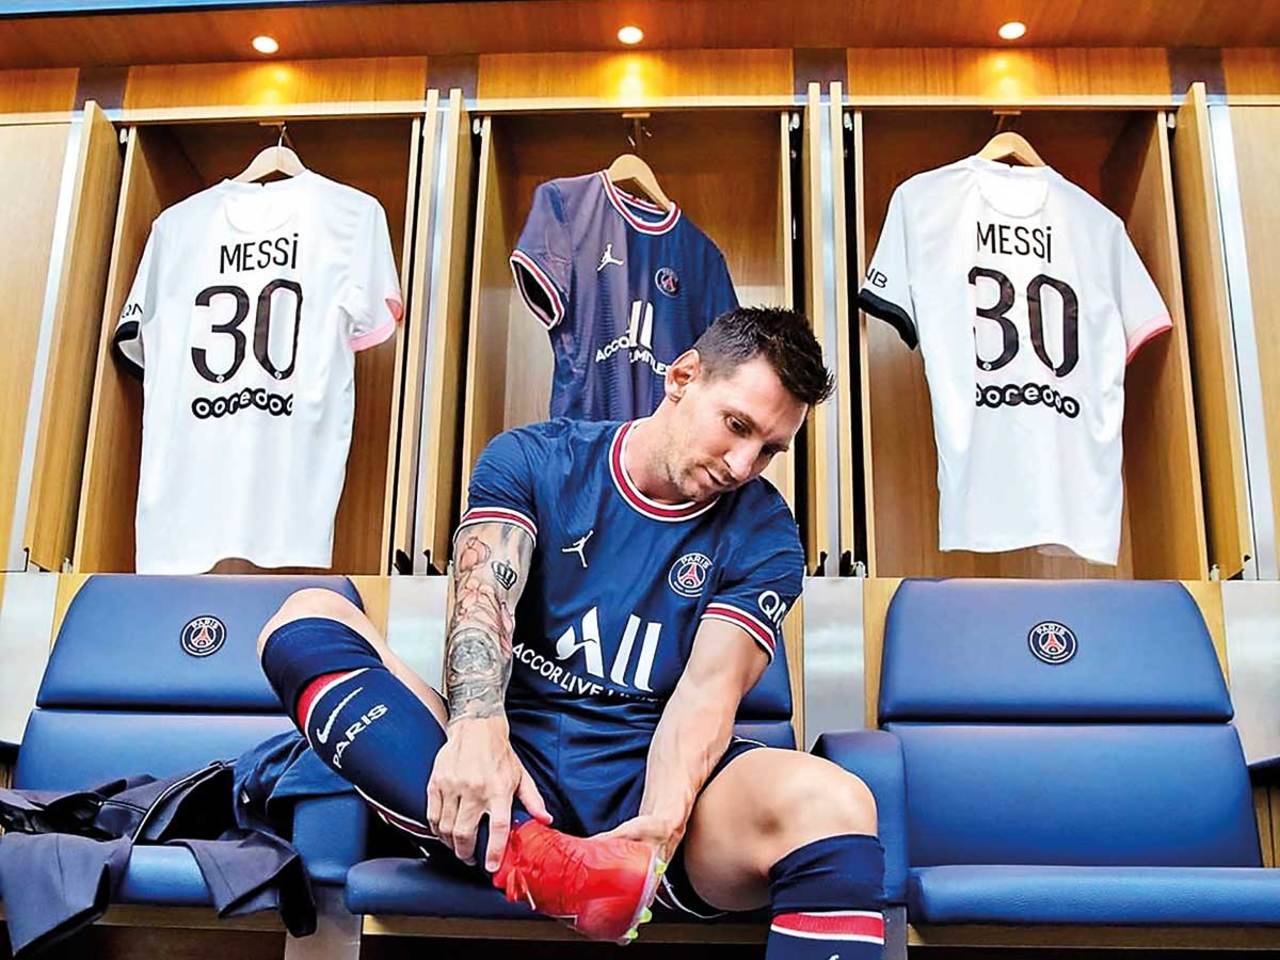 It's mission impossible to get a of the new Lionel Messi jersey, say NCR football the field News - Times of India